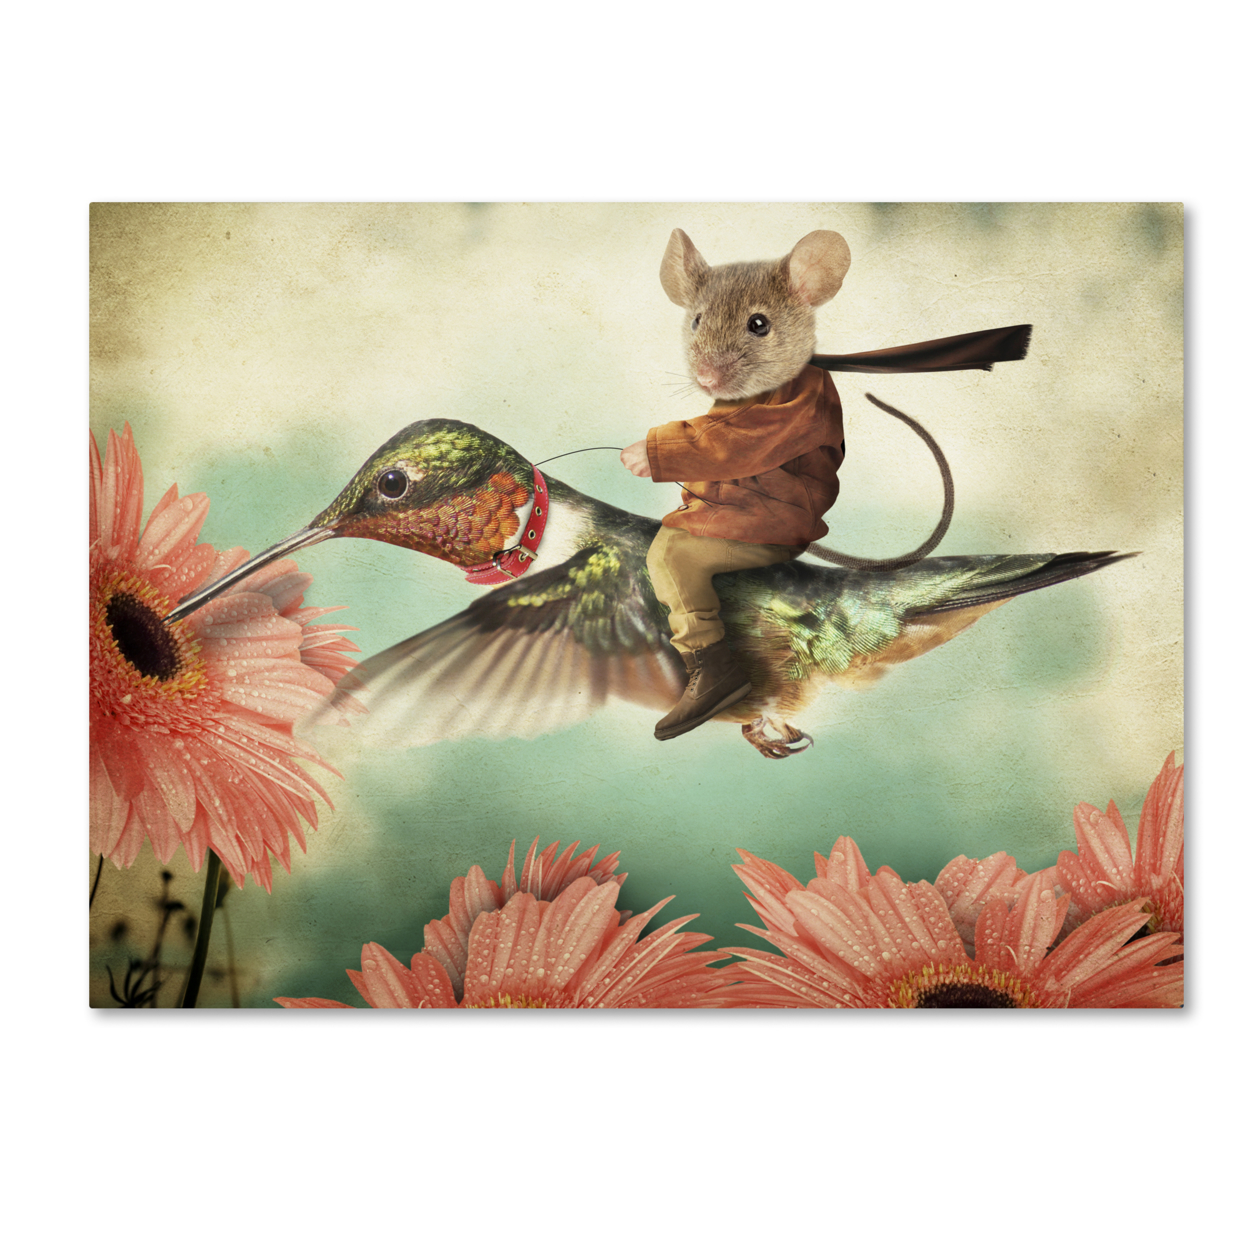 J Hovenstine Studios 'Catching A Ride On A Hummingbird' Canvas Wall Art 35 X 47 Inches